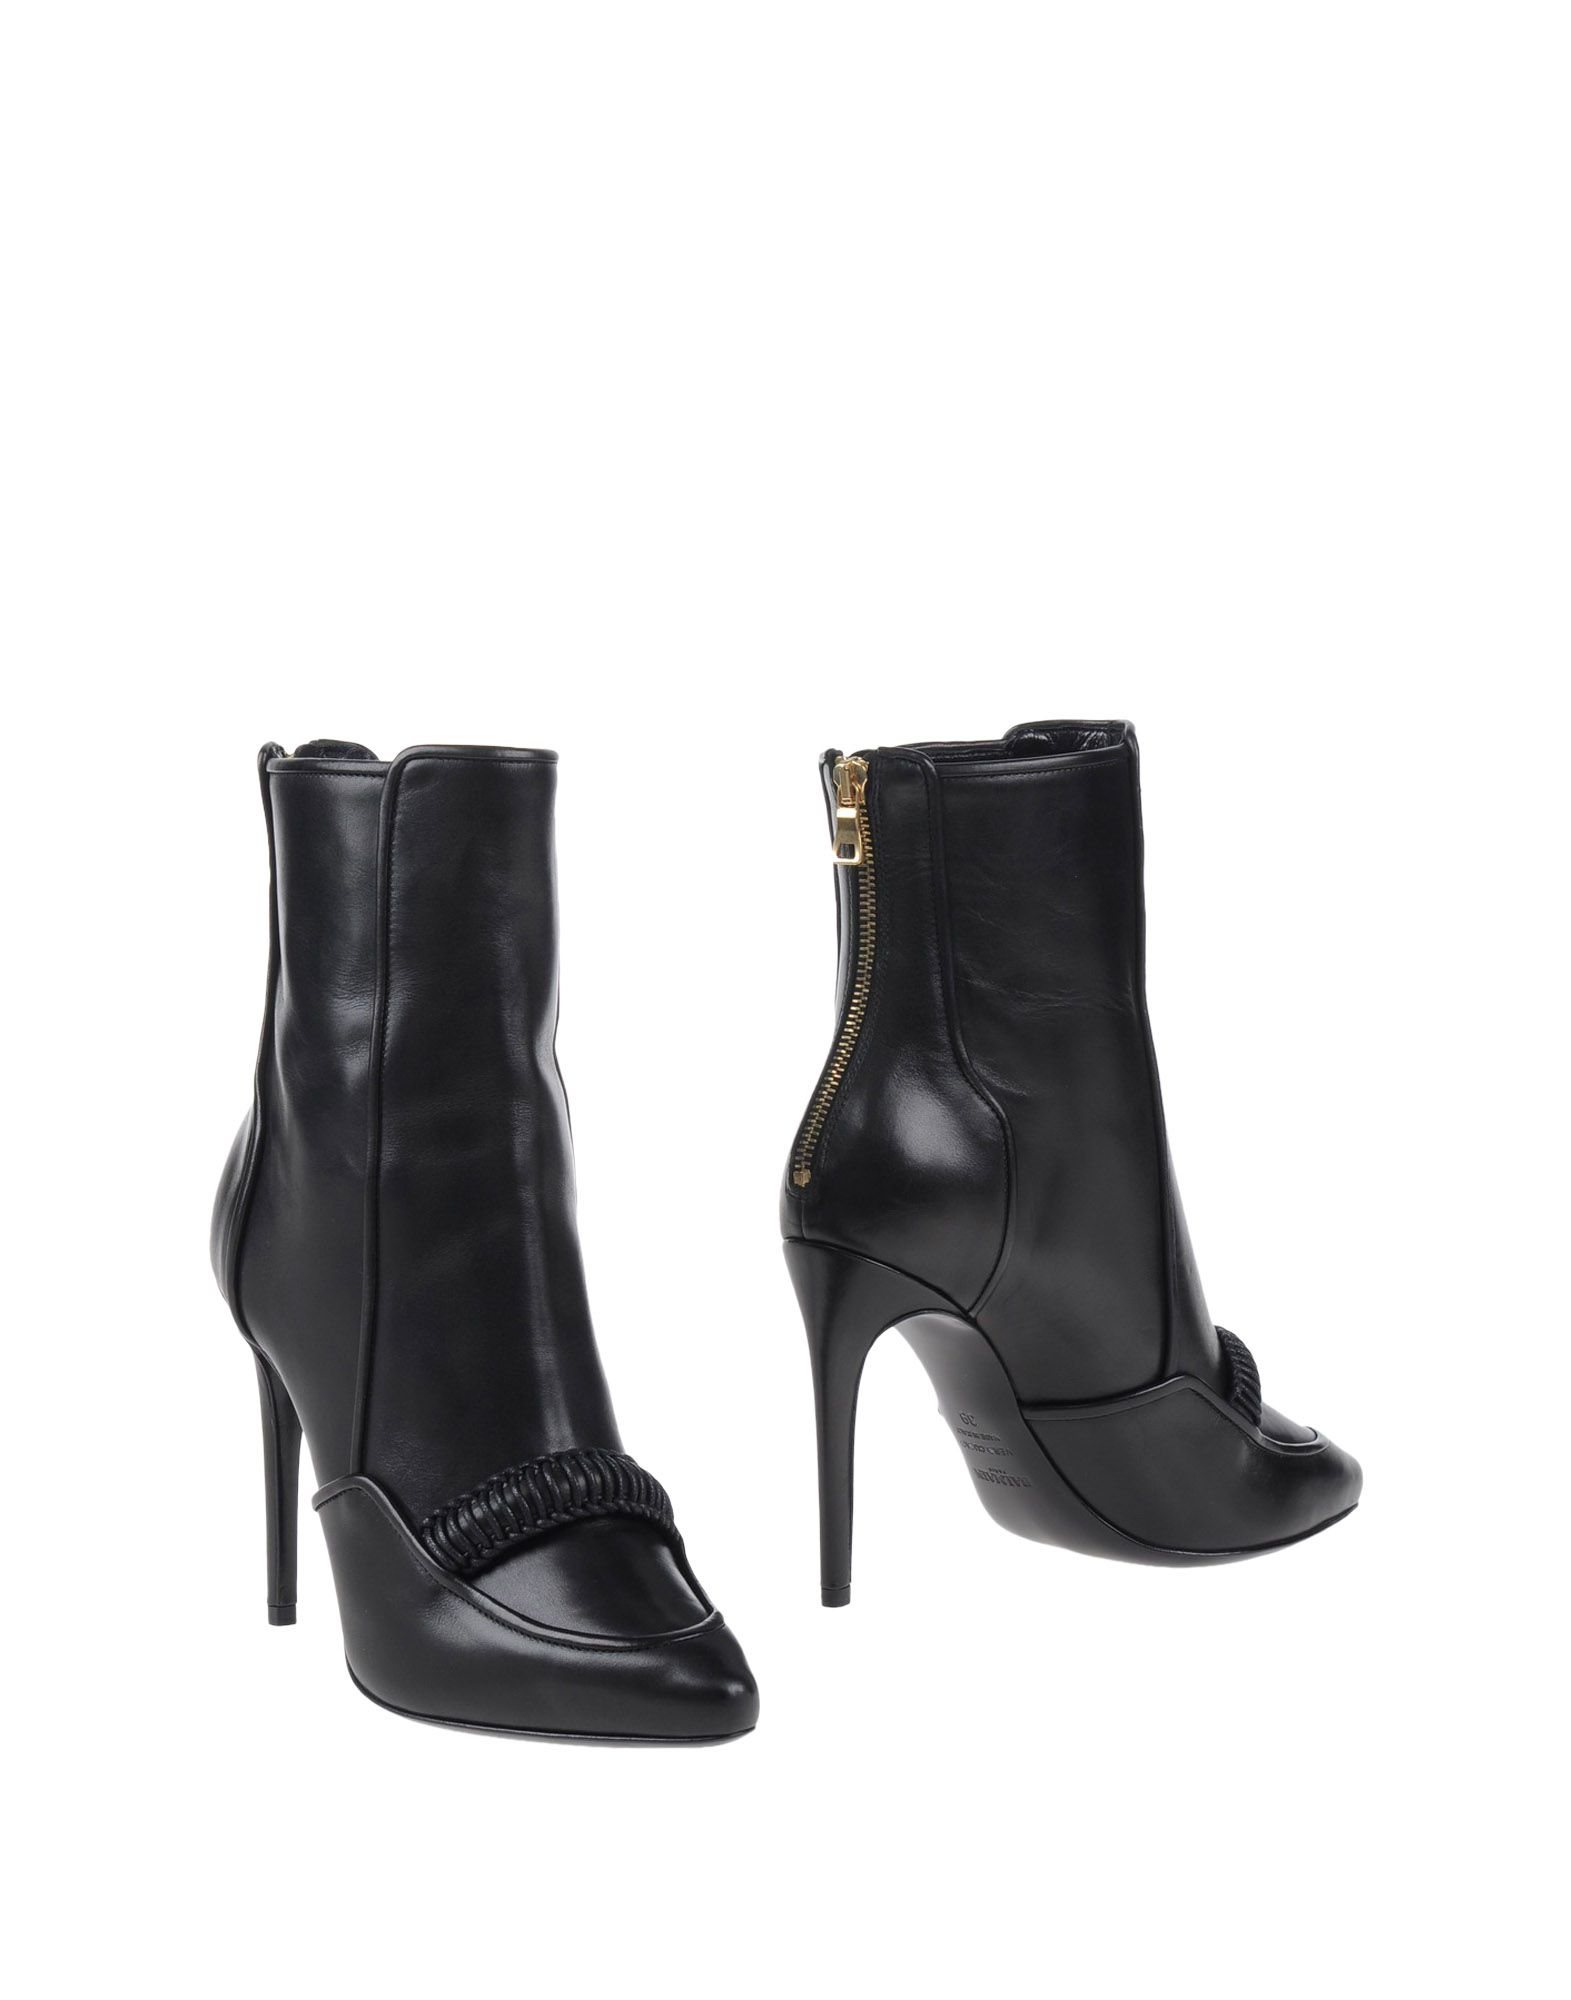 Lyst - Balmain Leather Ankle Boots in Black